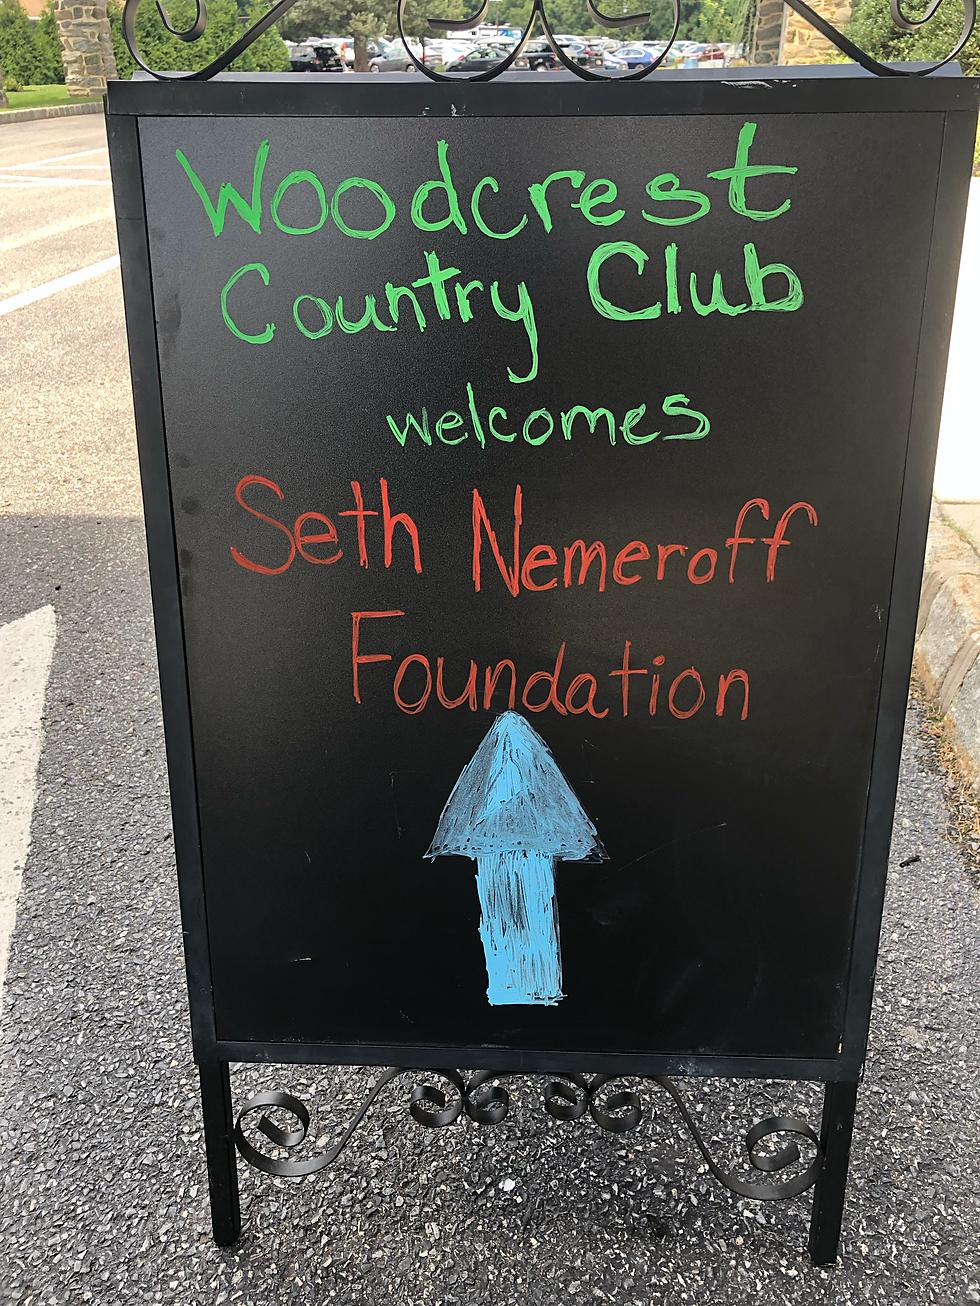 Seth Nemeroff Foundation raises over 10k for City Of Angels fight against addiction